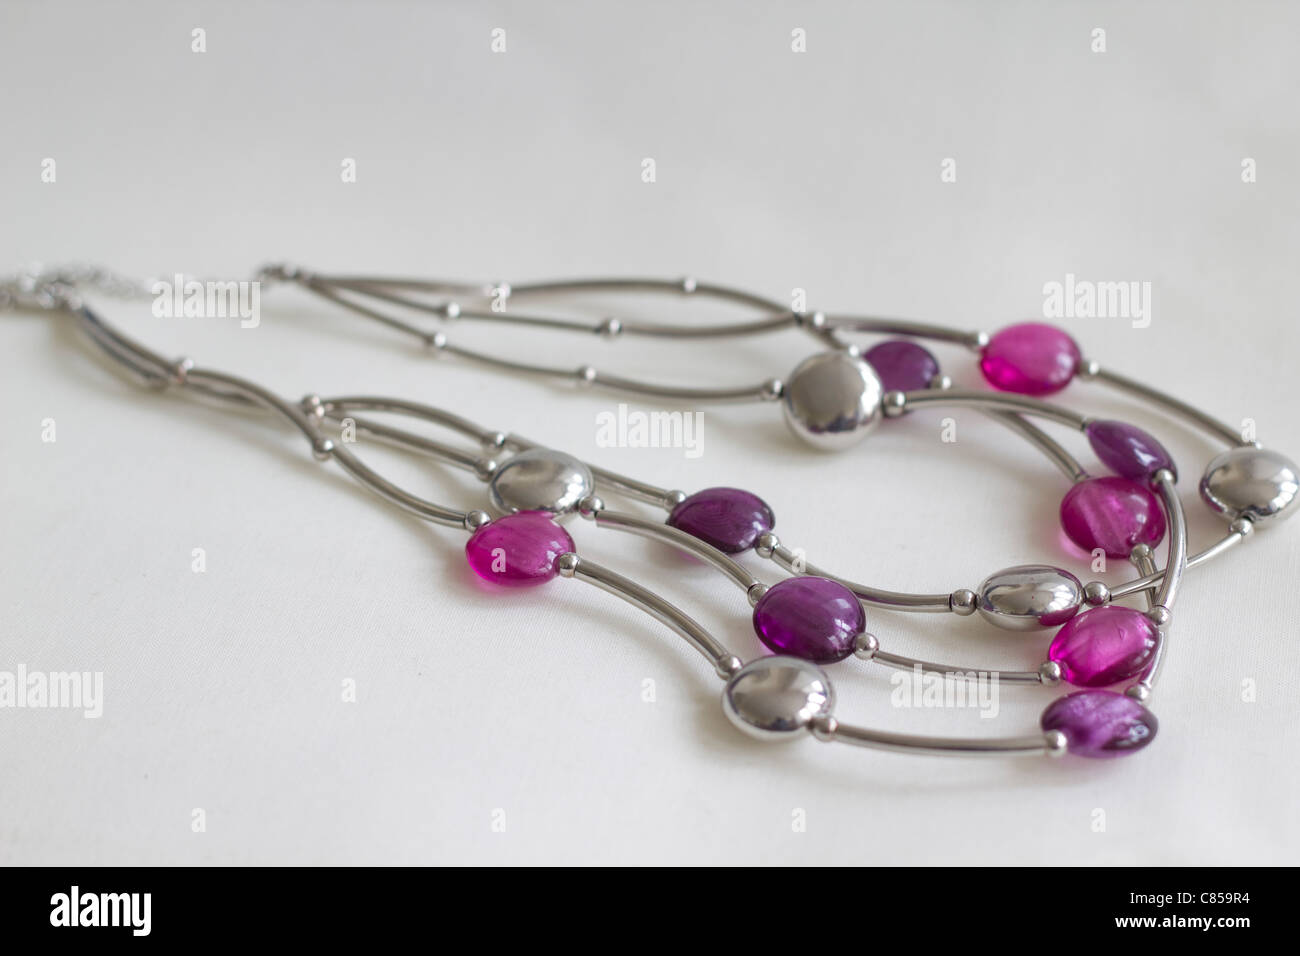 A pretty purple and silver necklace with amethyst colors and photographed in natural light Stock Photo